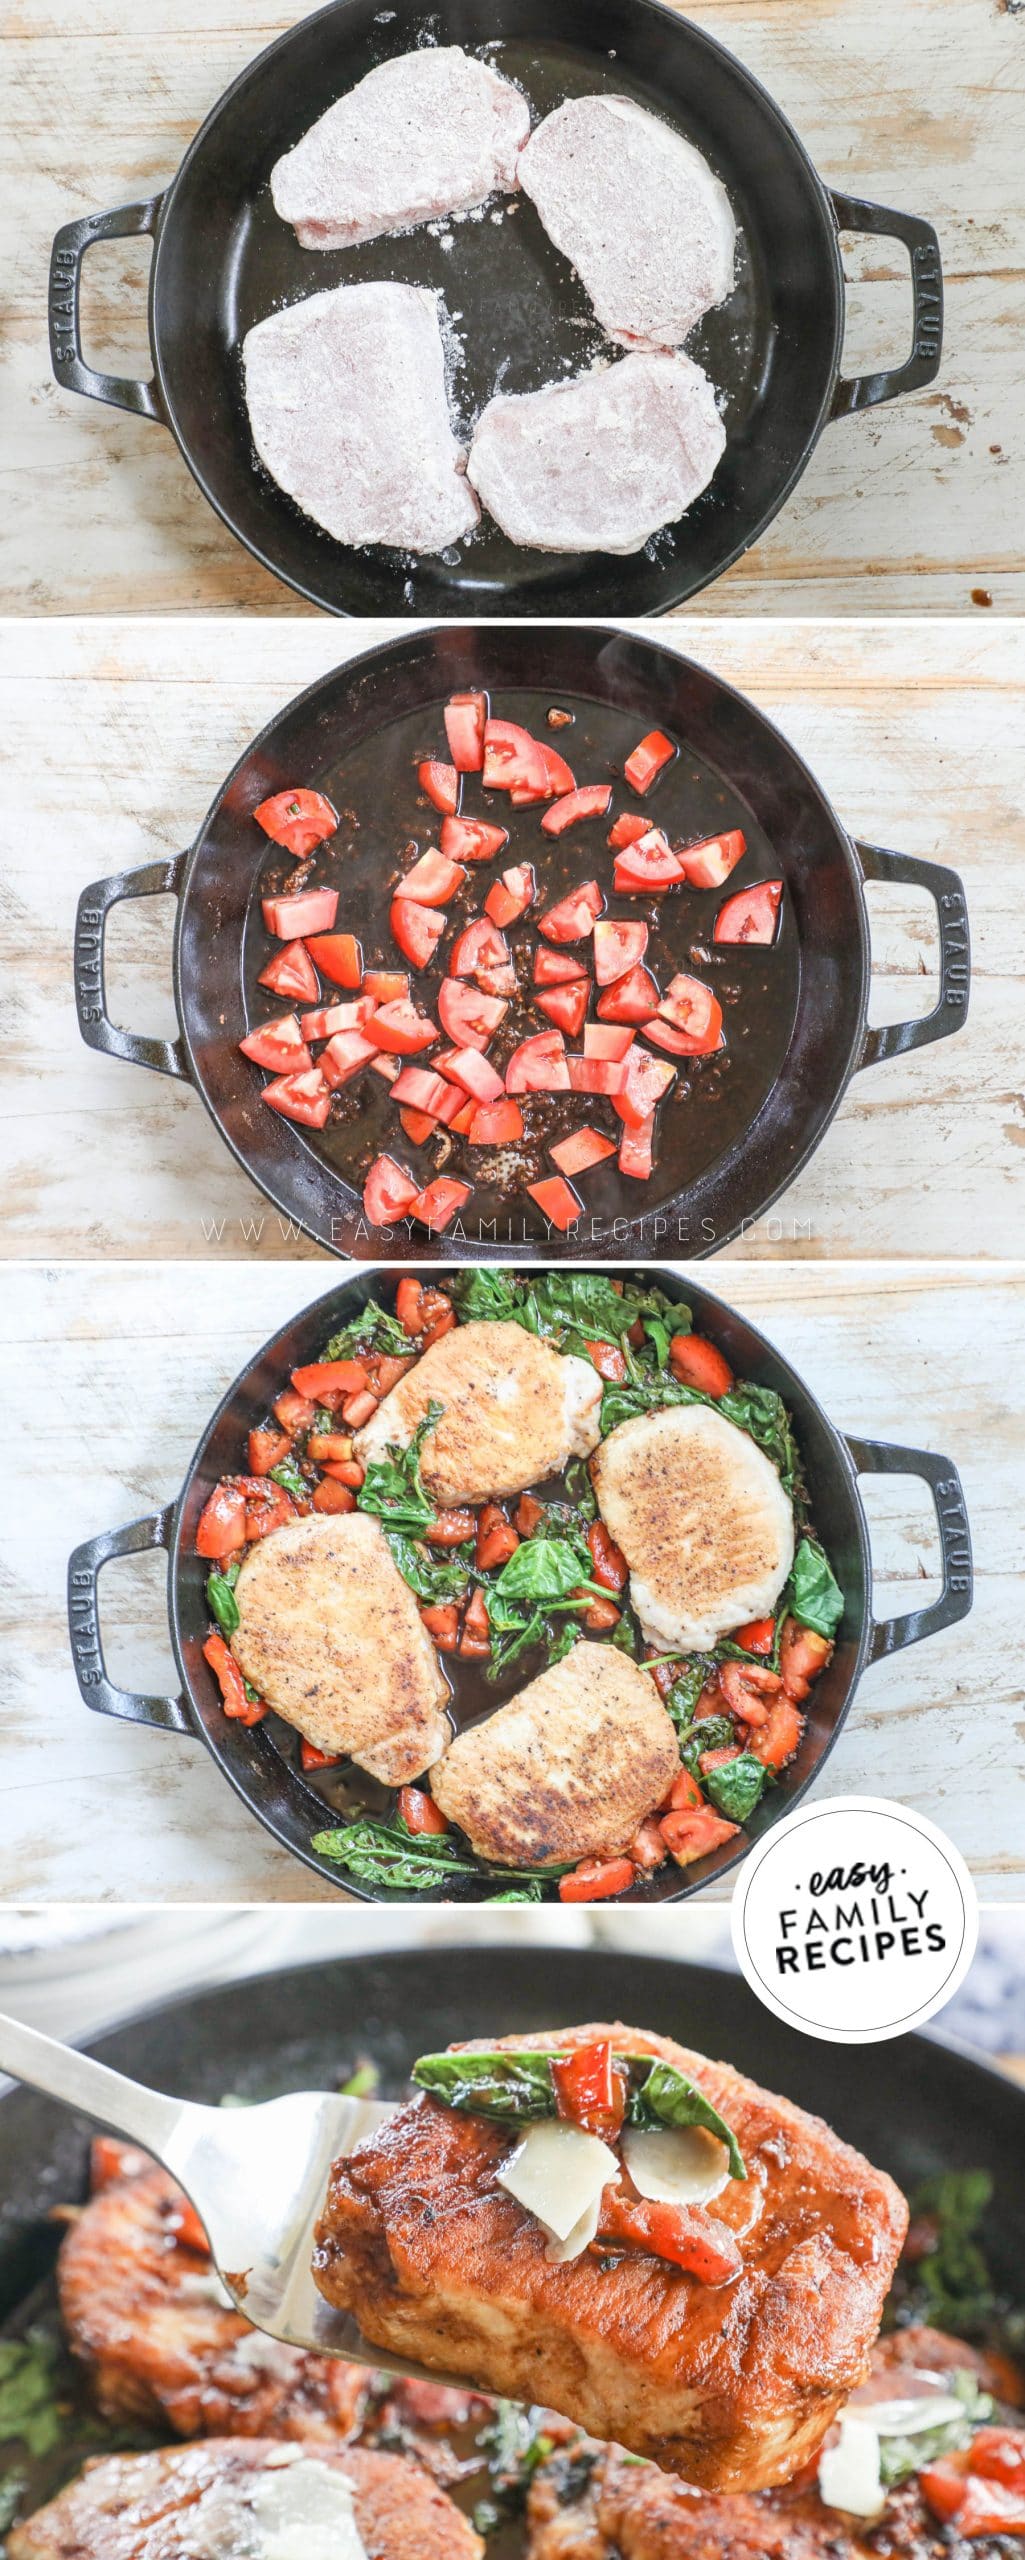 Process photos for How to make Tuscan Pork Chops 1. Dredge Pork Chops in flour and pan fry. 2. Add tomatoes and balsamic vinegar to skillet and cook down. 3. add back in pork chops and spinach to finish cooking. 4. Serve garnished with parmesan cheese.